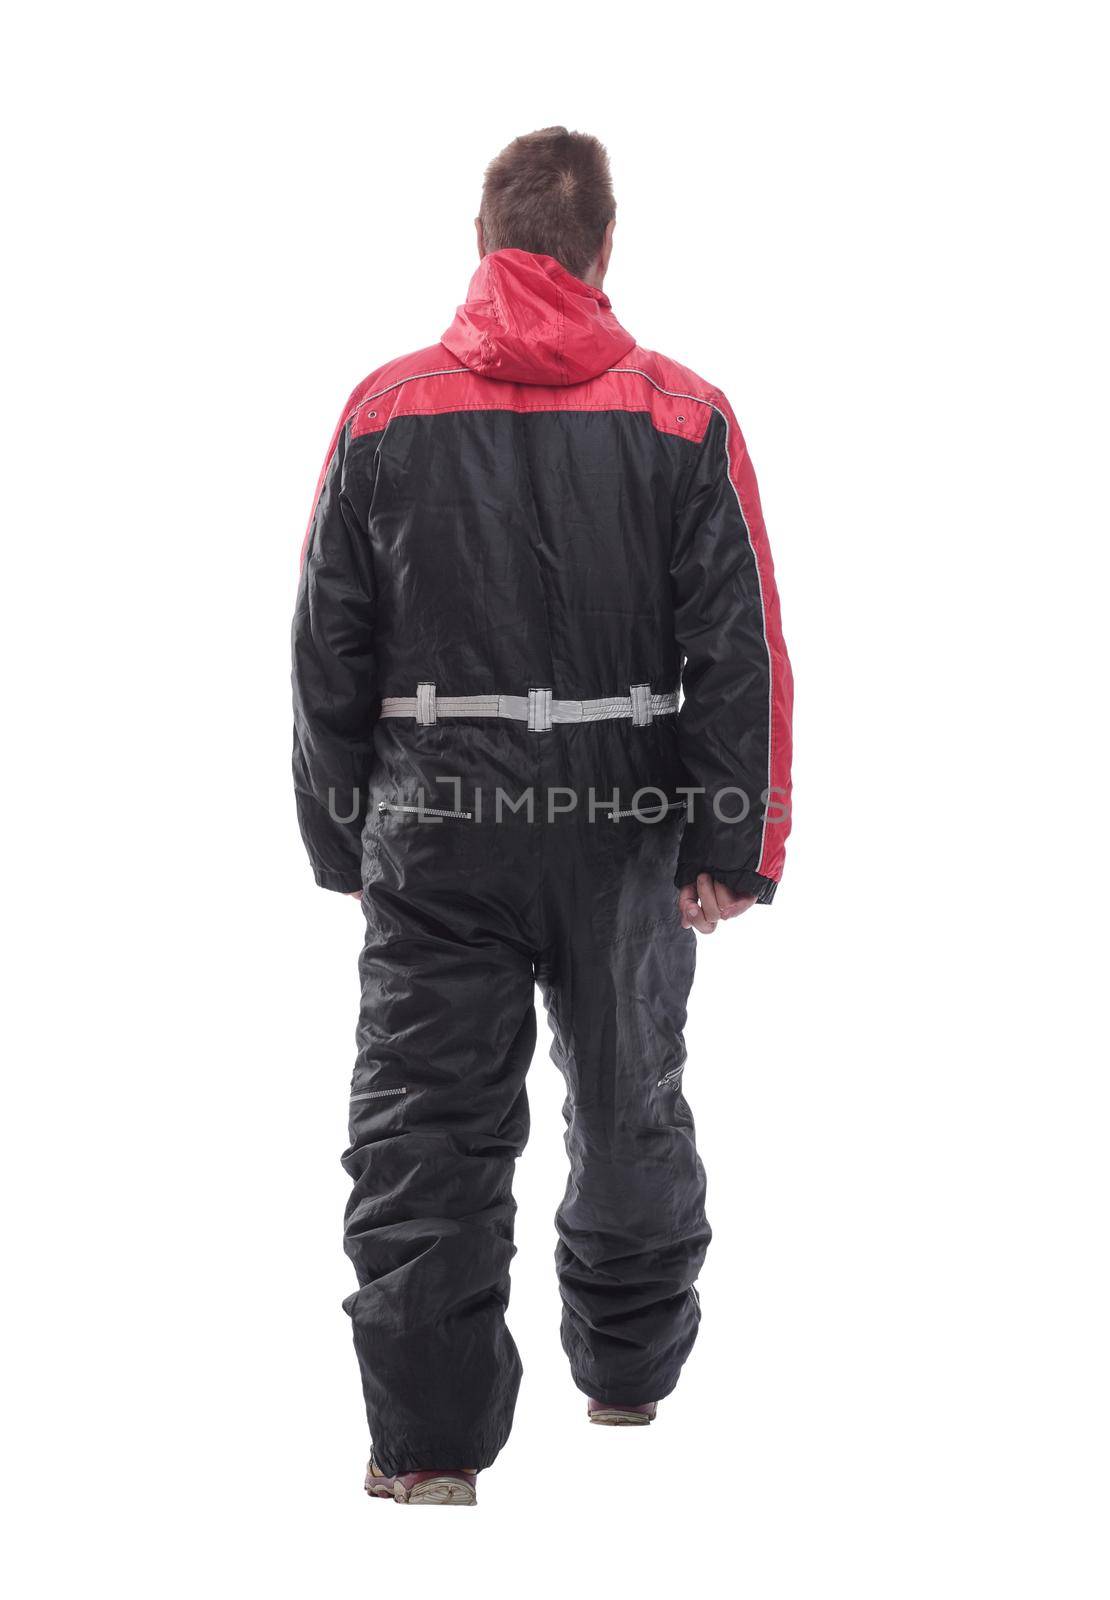 man in a winter insulated jumpsuit reading walking forward by asdf